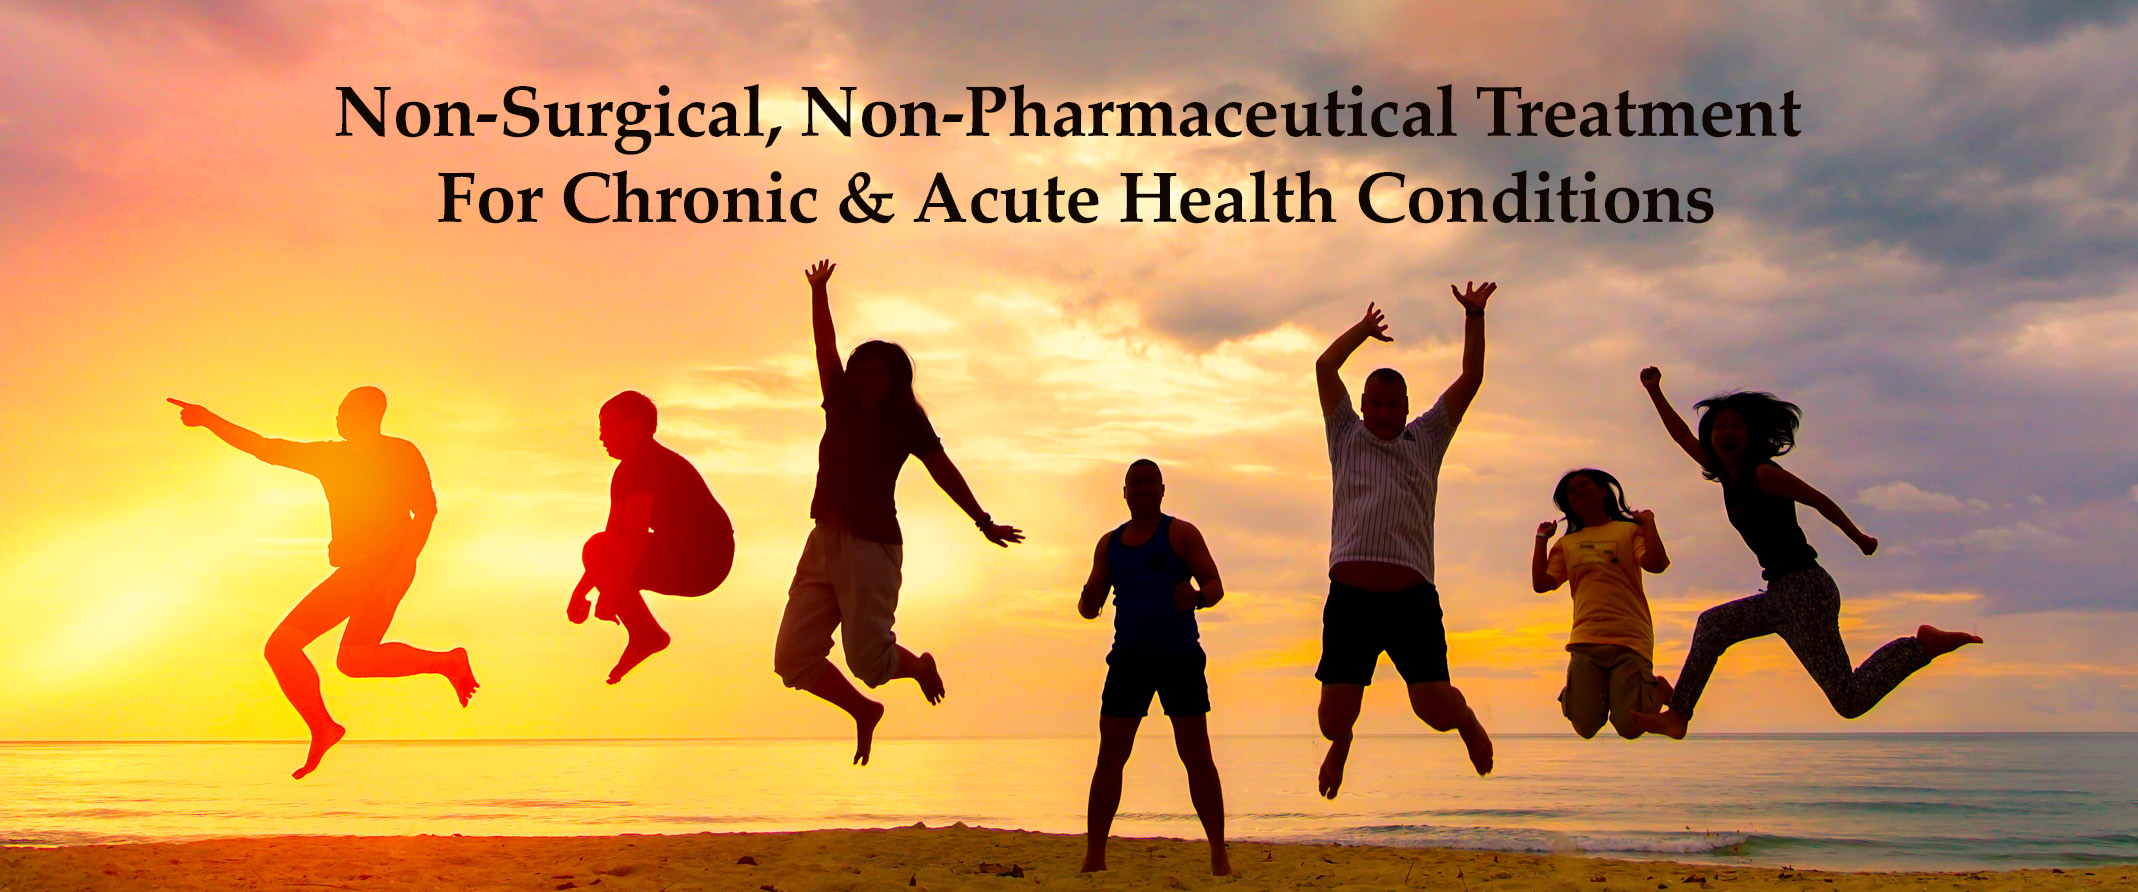 non surgical, non-pharmaceutical treatment for chronic and acute conditions. image of people mid air